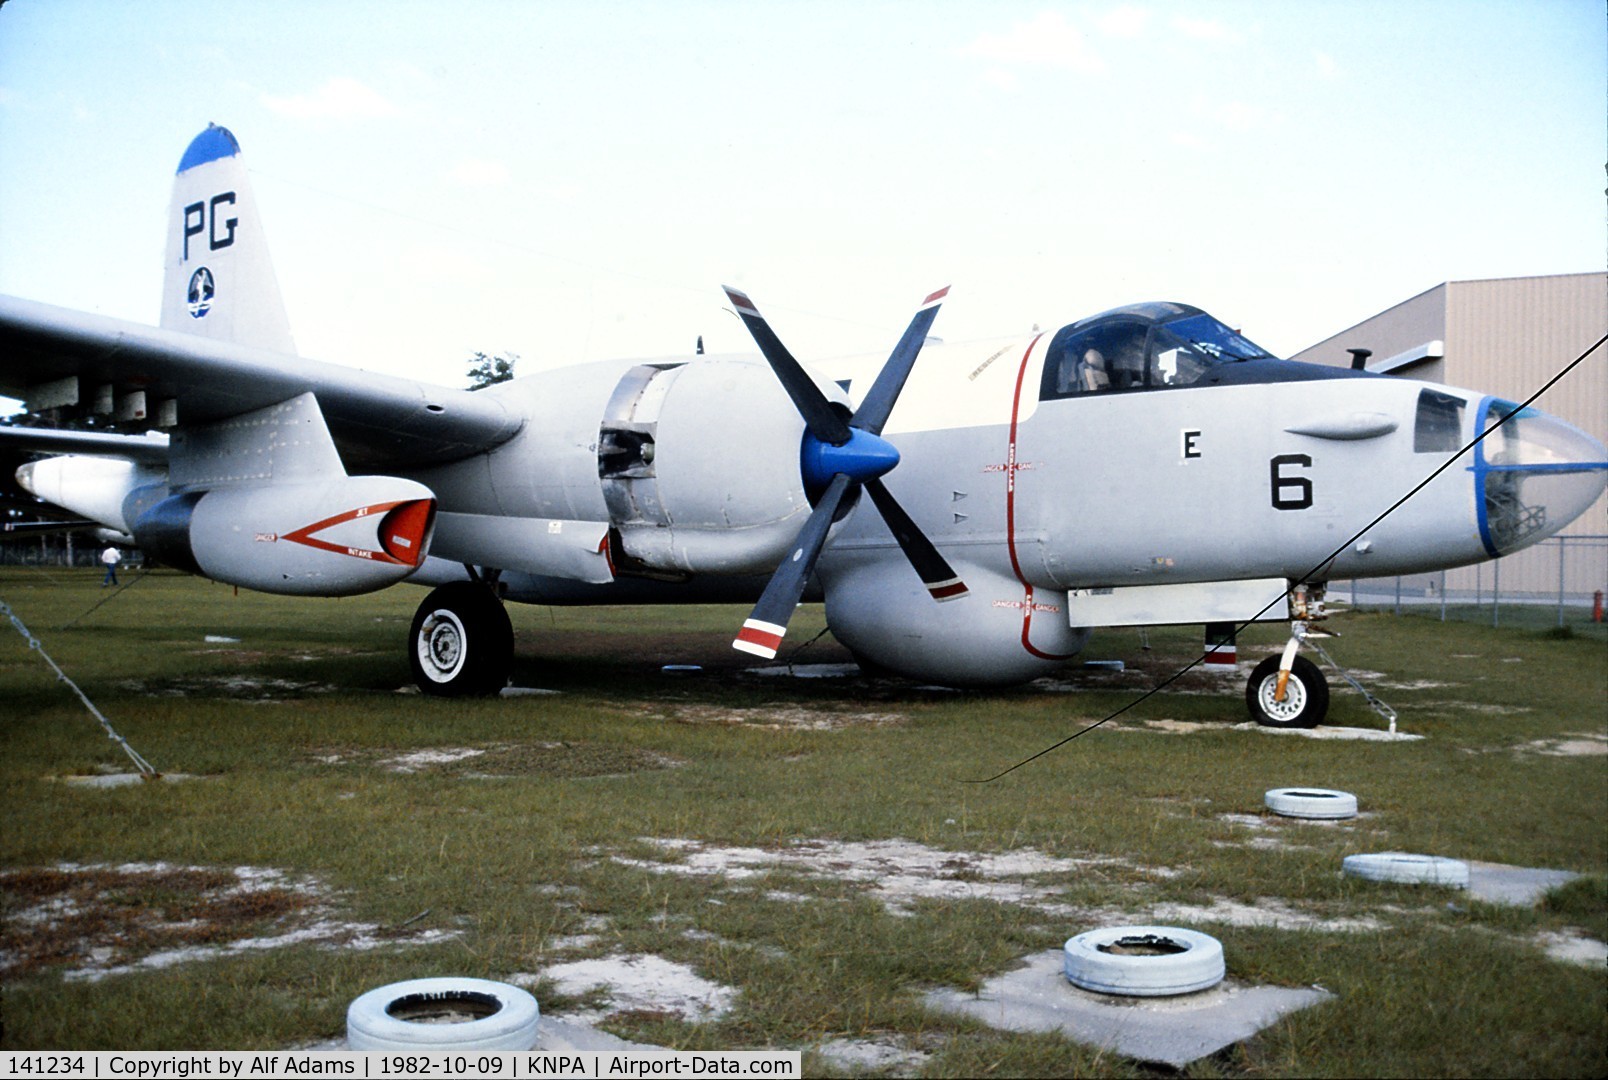 141234, Lockheed SP-2H Neptune C/N 726-7106, At the National Naval Aviation Museum, Pensacola, Florida in 1982.